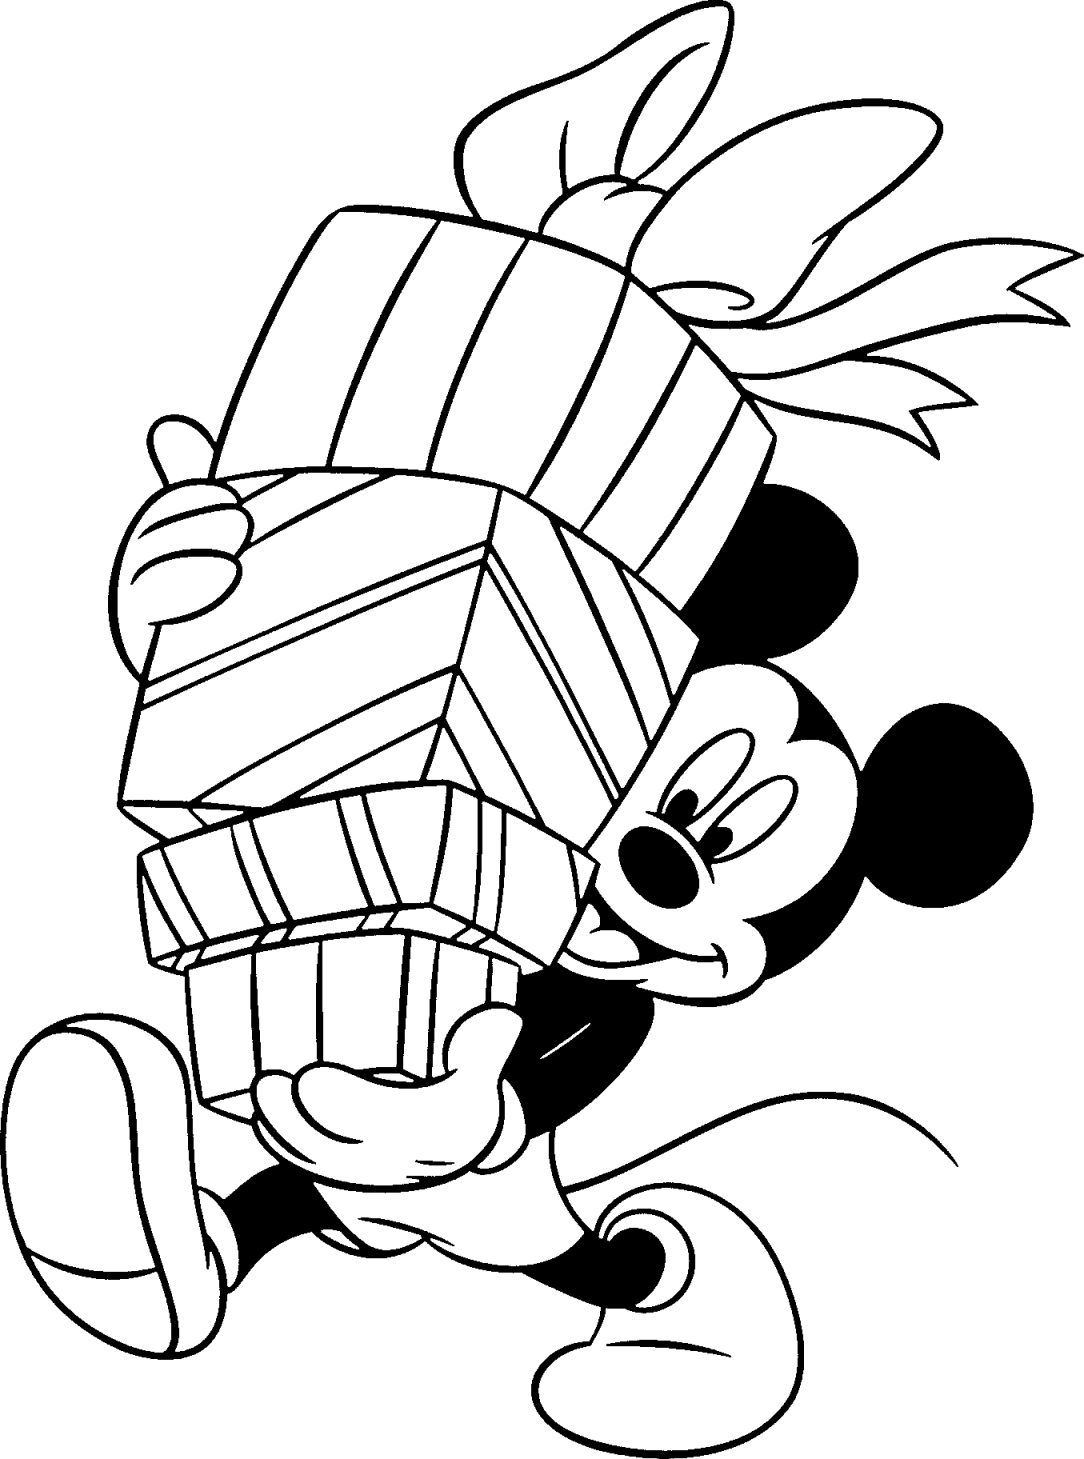 mickey mouse happy birthday coloring page for kids - Coloring Point